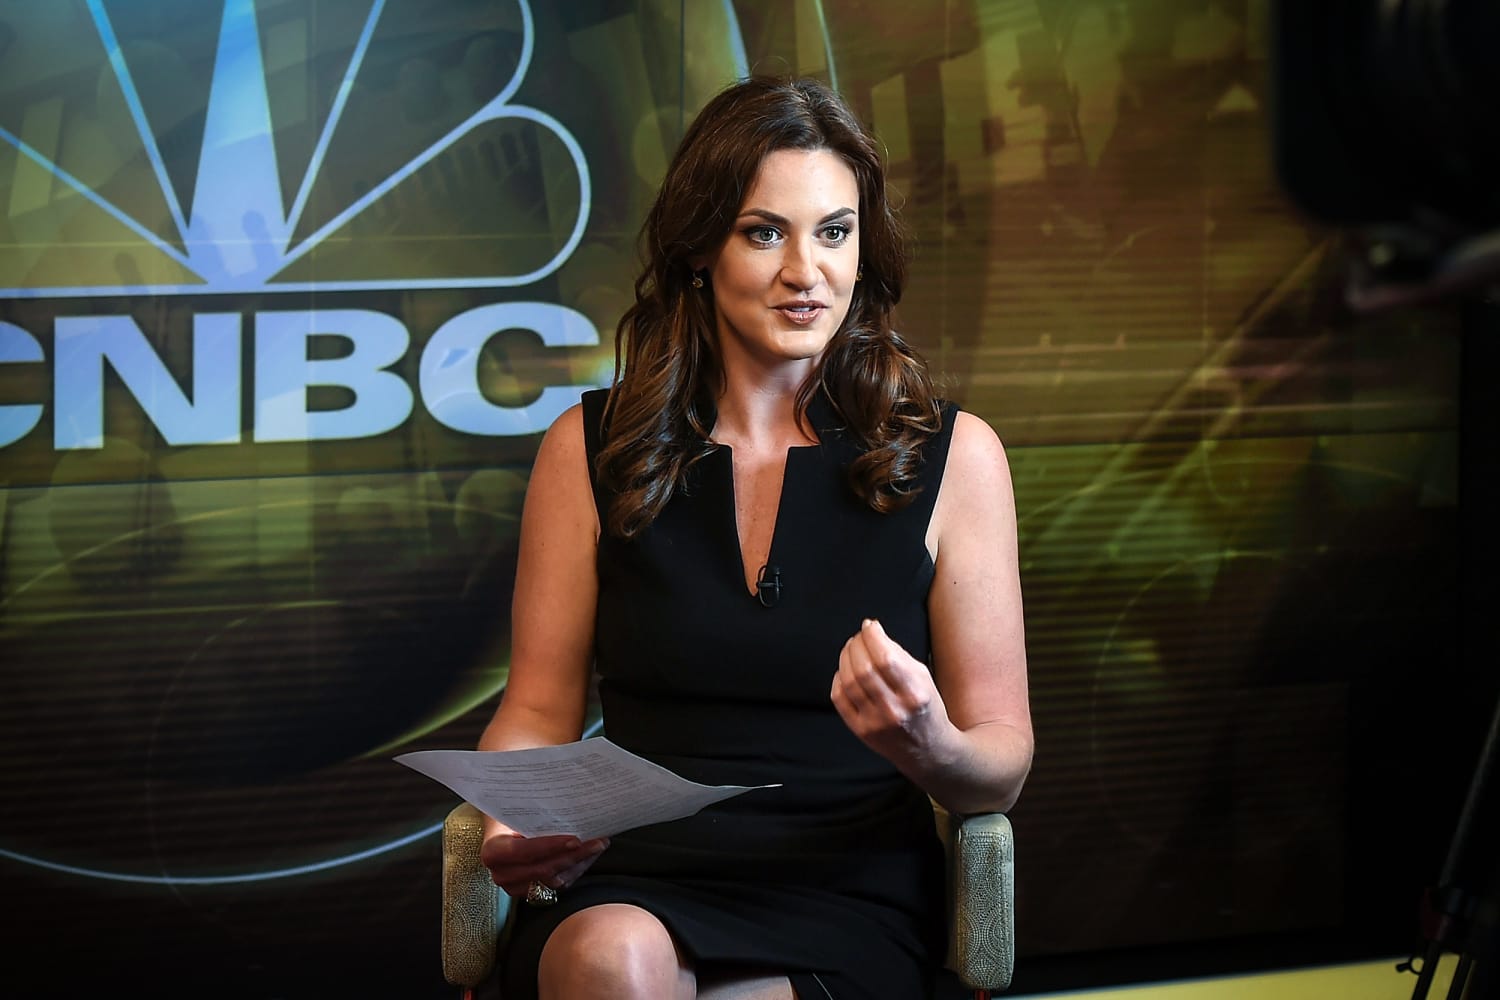 CNBC anchor Hadley Gamble accused NBCUniversal CEO Jeff Shell of sexual harassment, her lawyer says